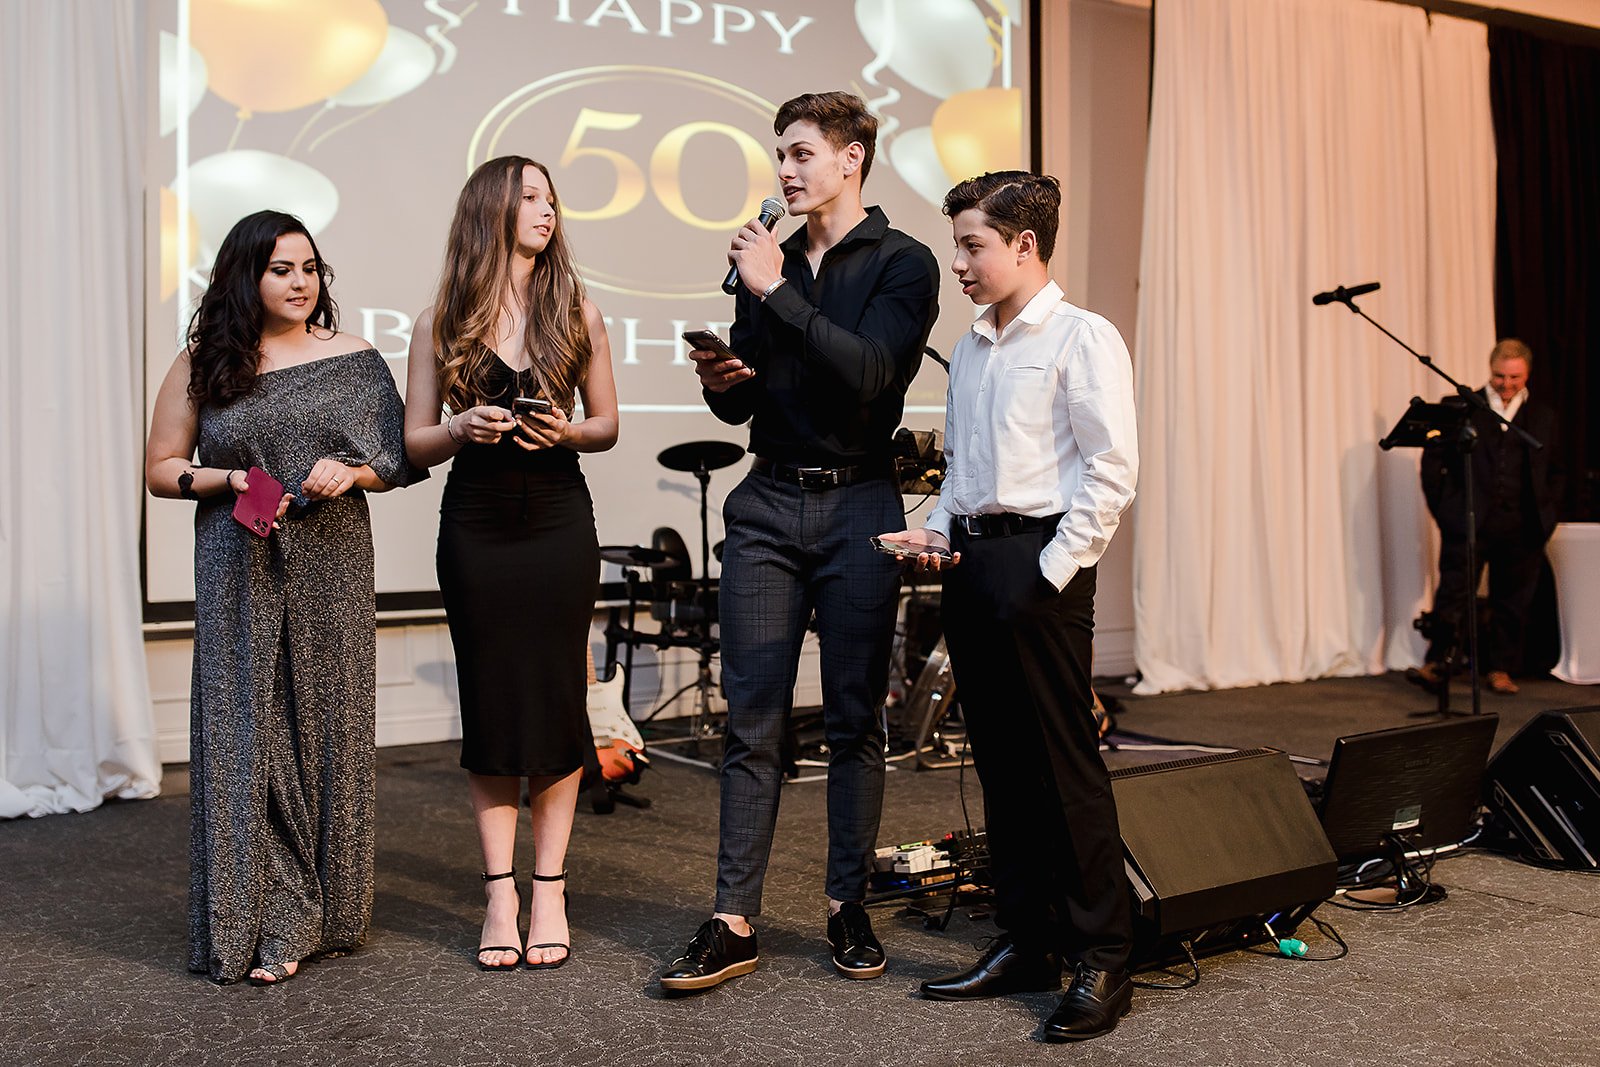  Selected images from an extraordinary 50th Birthday celebration held at the Ballroom in Fancourt, South Africa. &nbsp; 